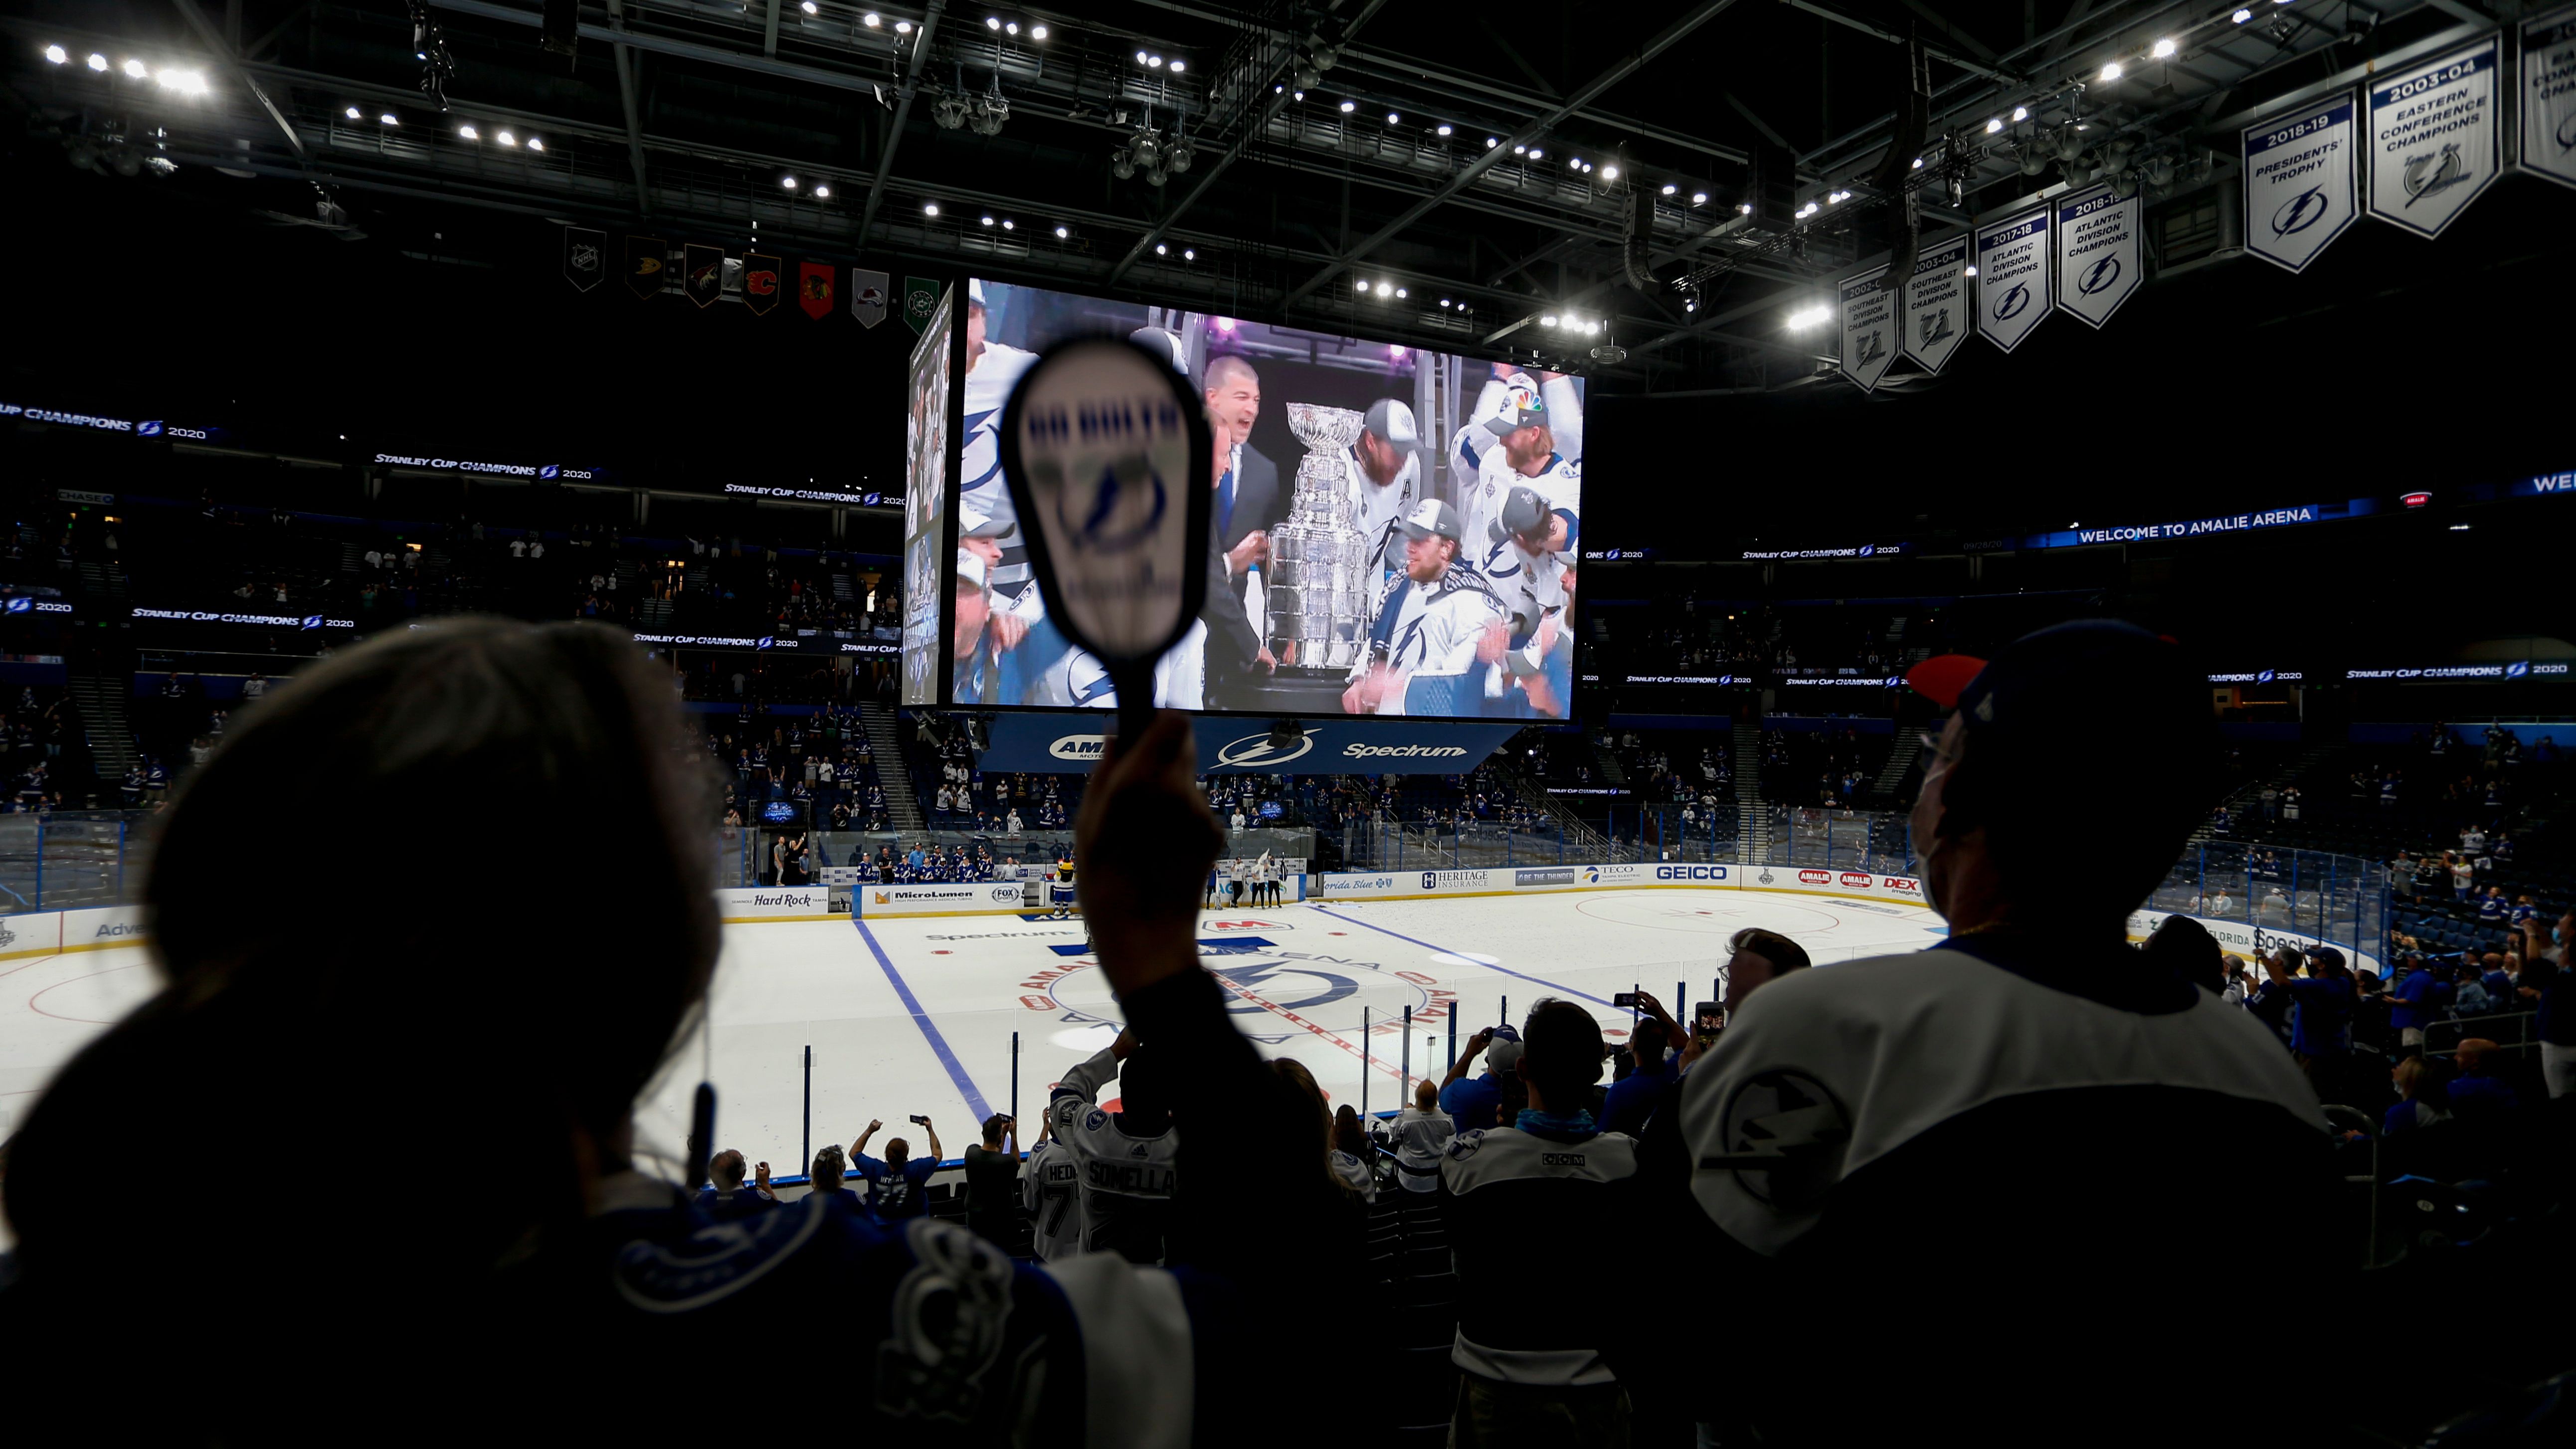 Tampa Bay Lightning fans share superstitions and rituals for a